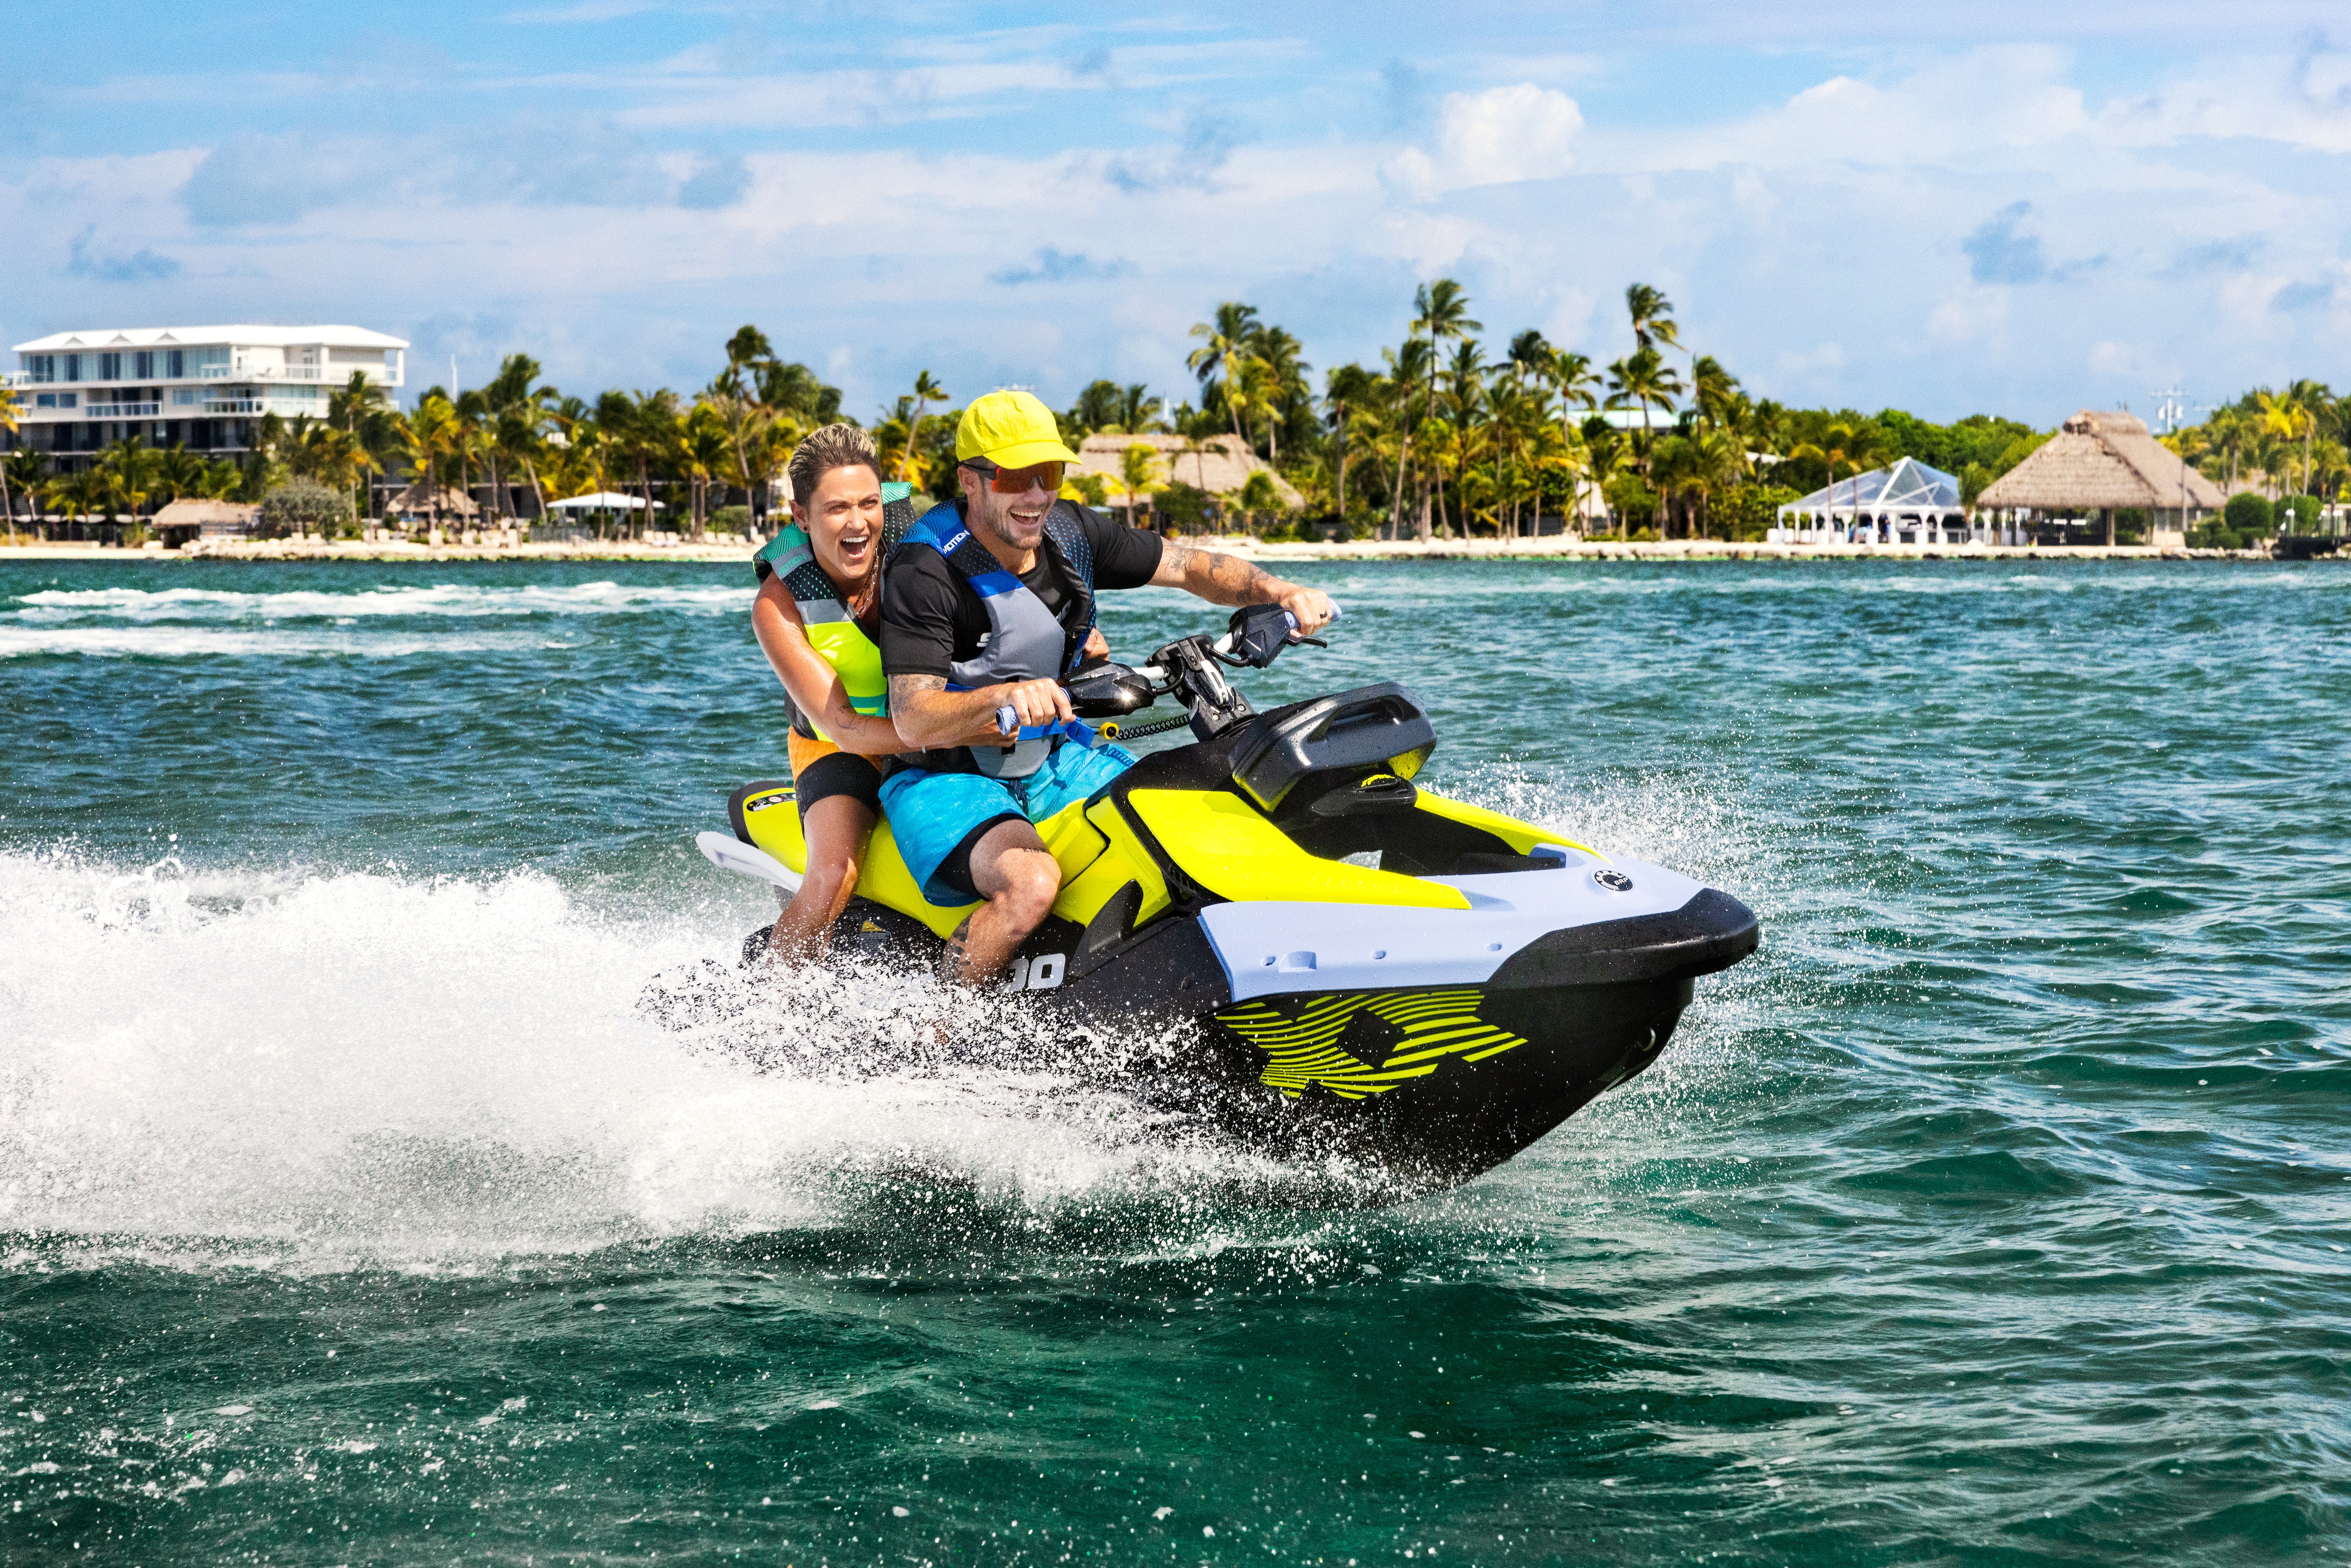 Man doing a quick turn on a high performance Sea-Doo RXP-X personal watercraft